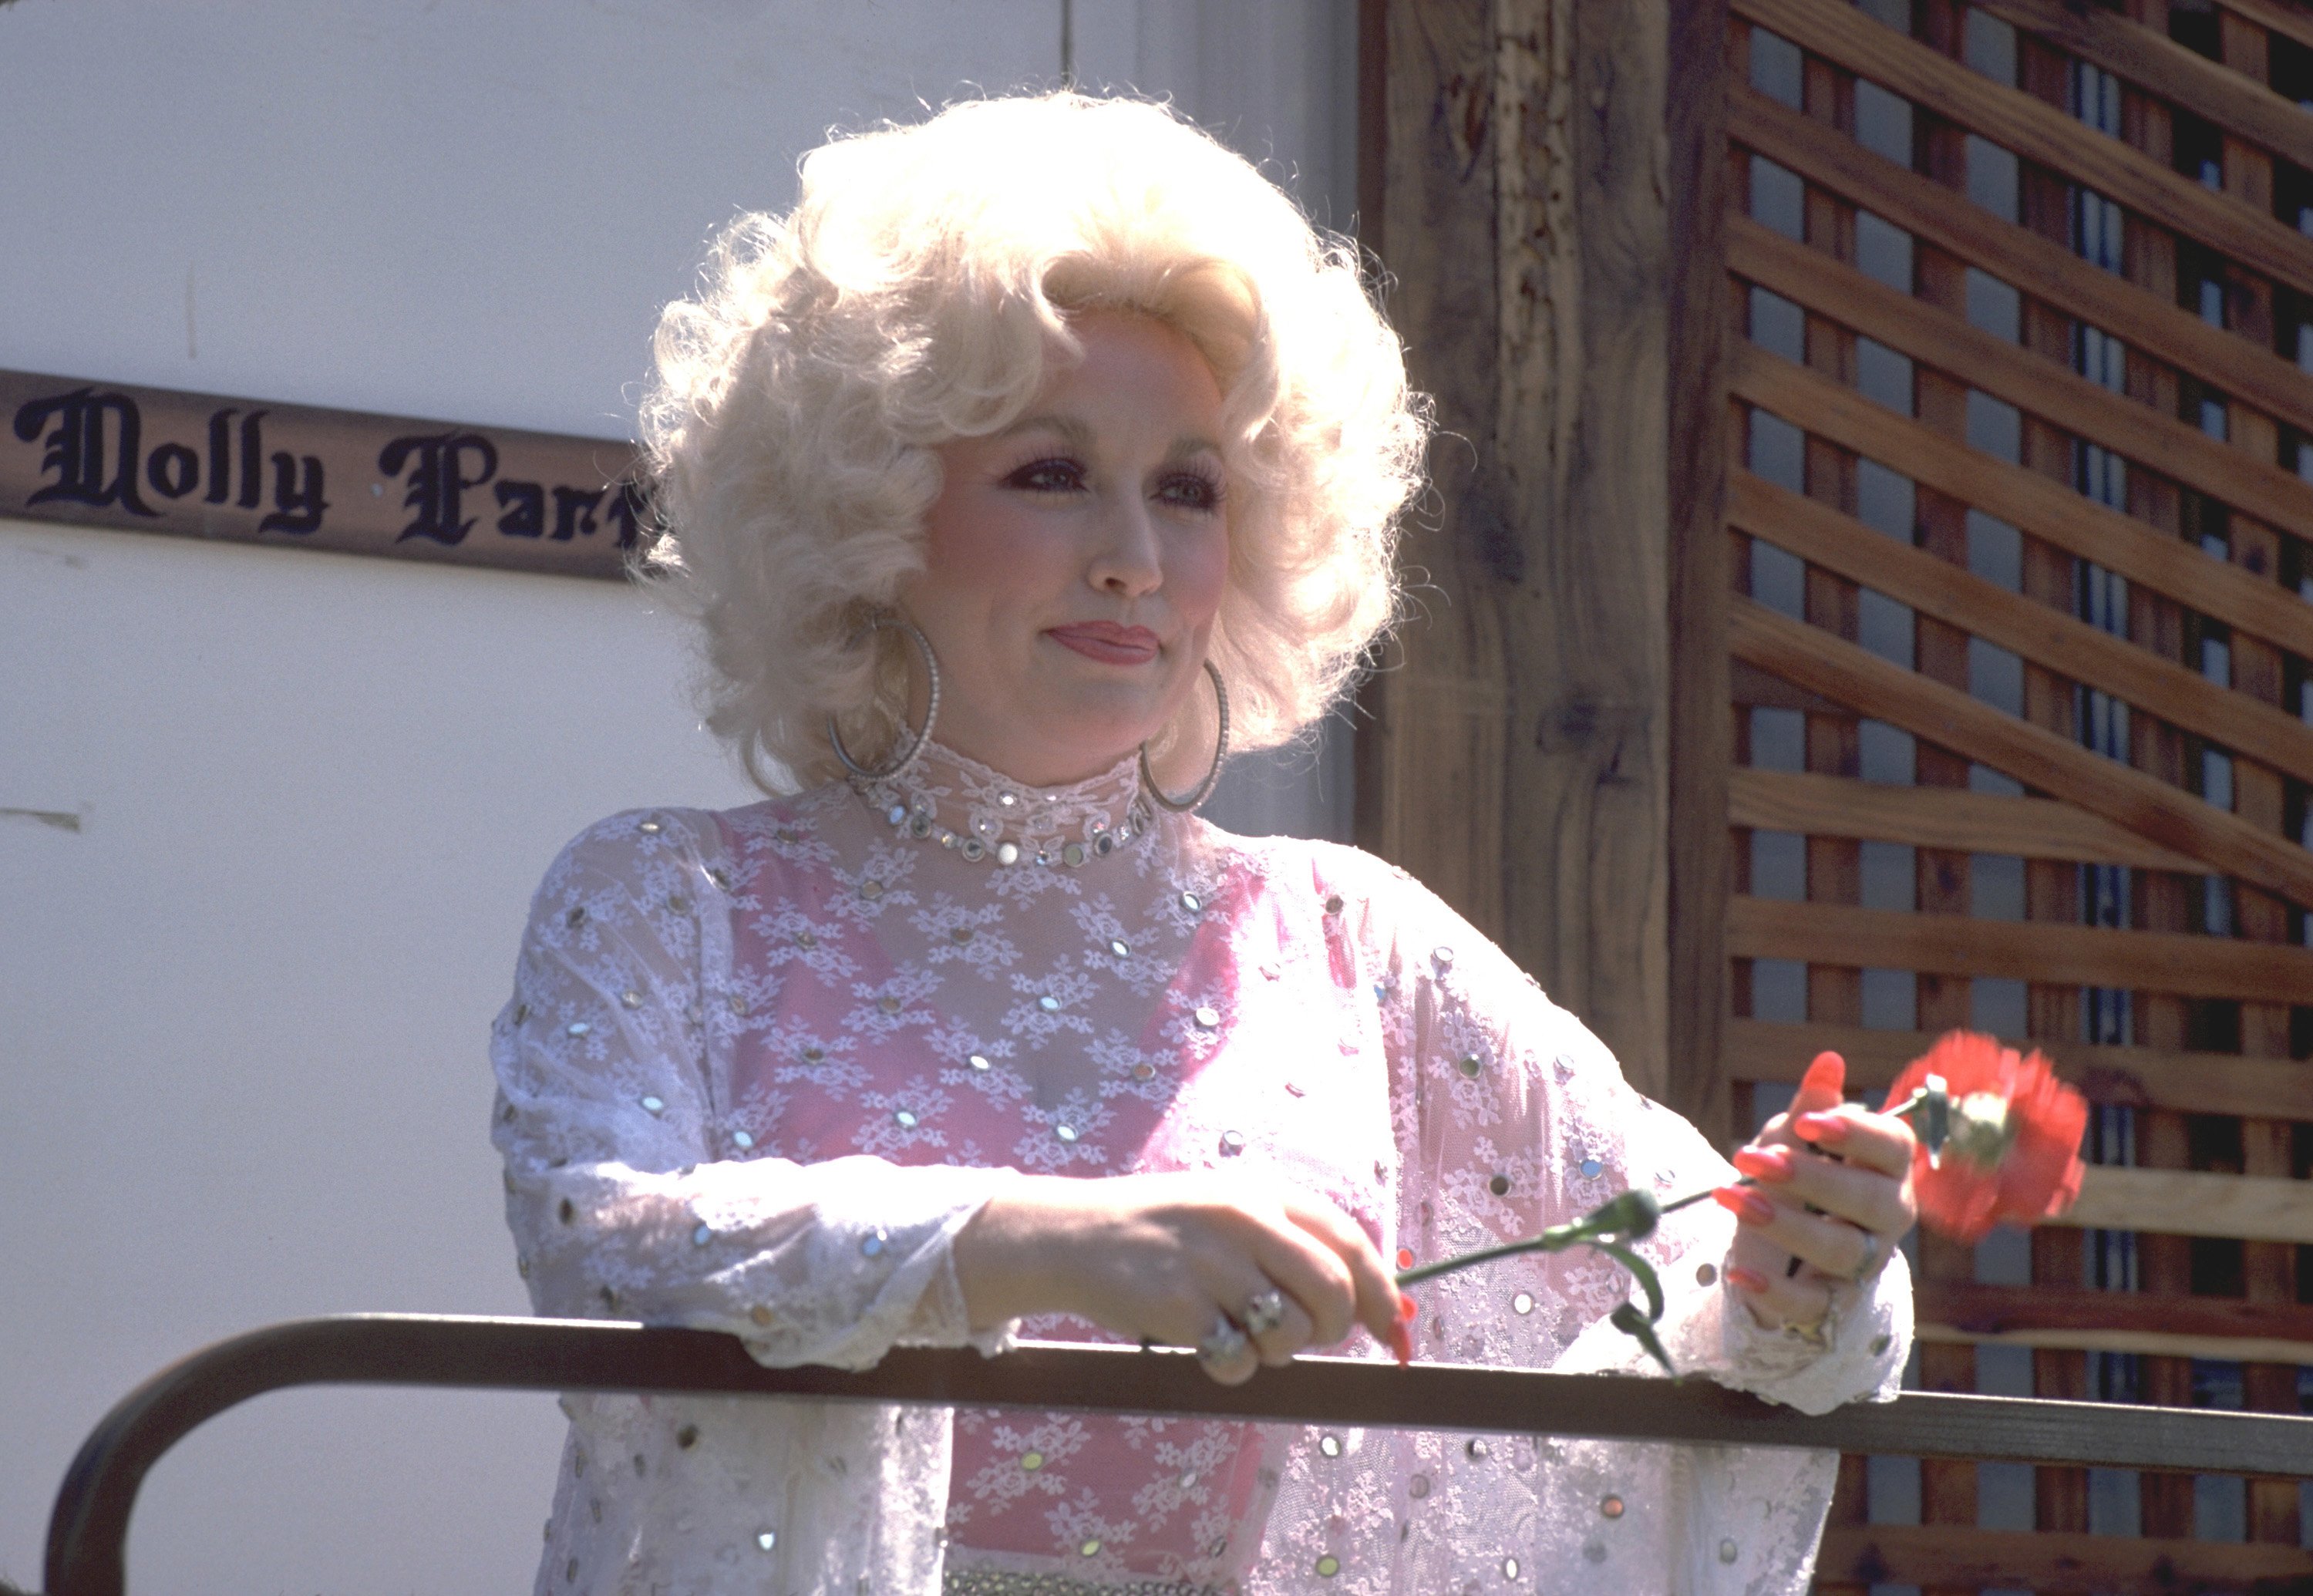 Dolly Parton wears a lace shirt and holds a flower.